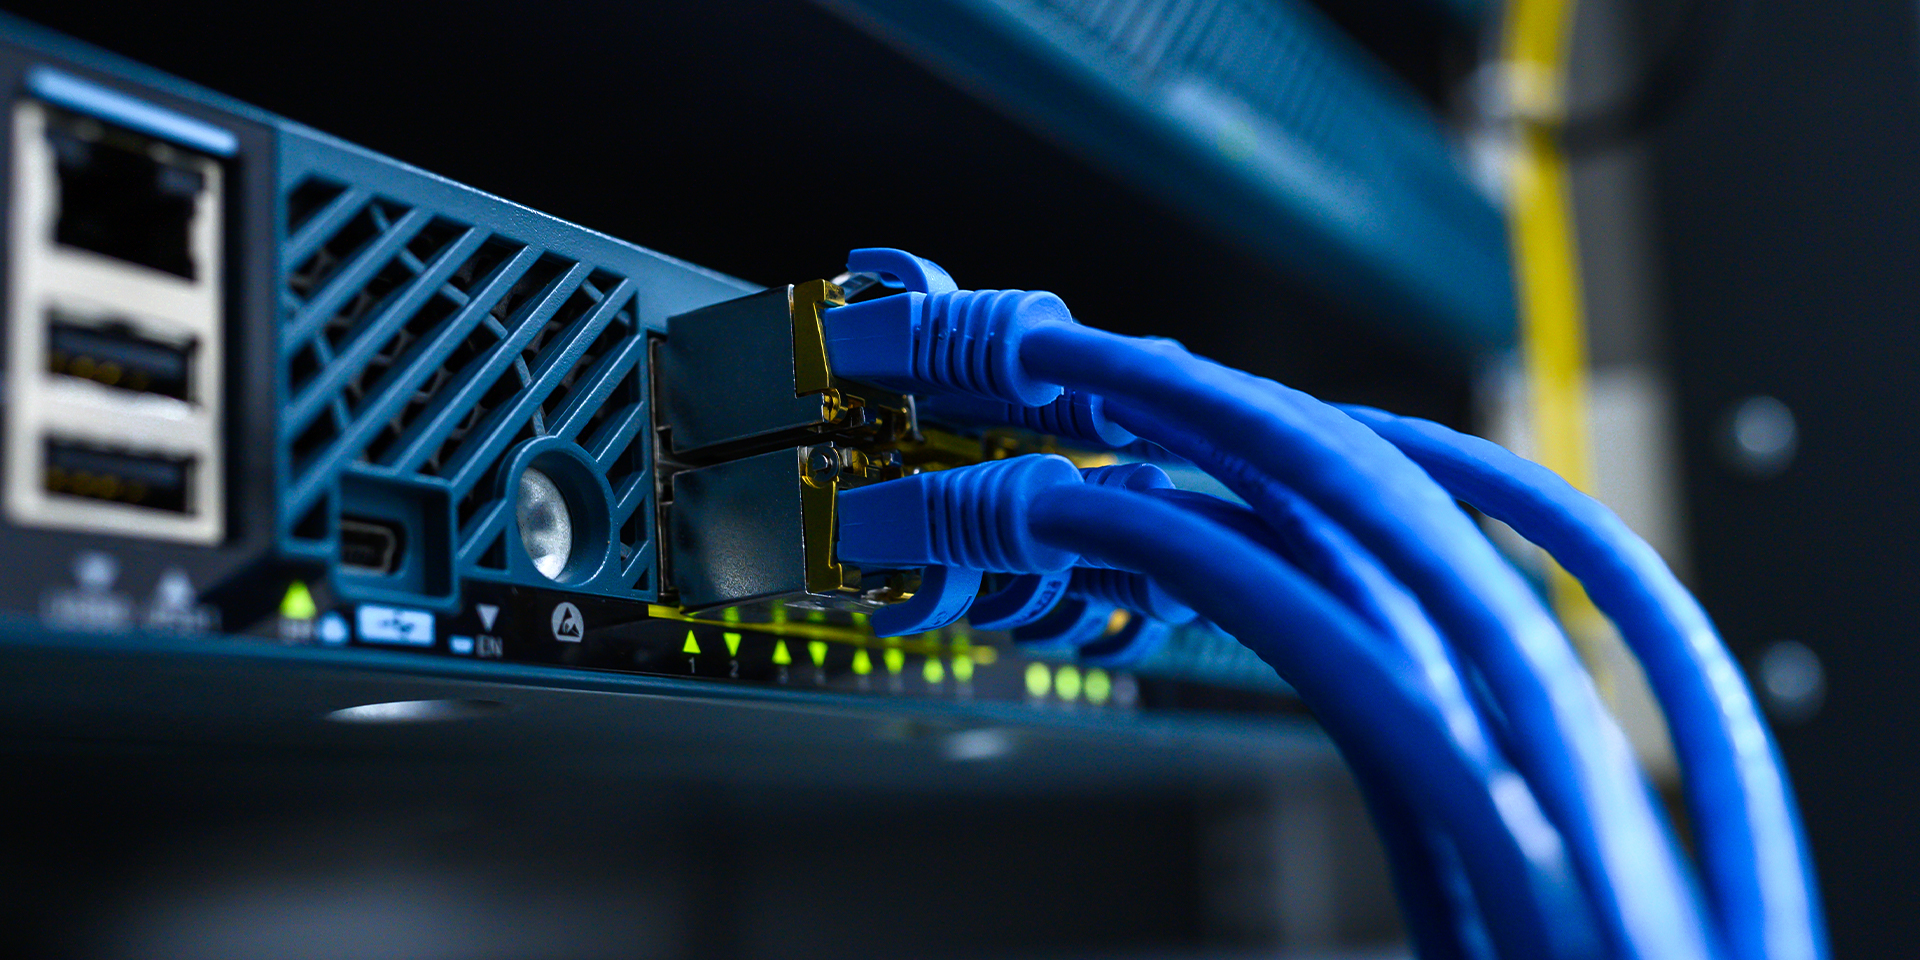 Characteristics of IT Cabling | components for network cabling